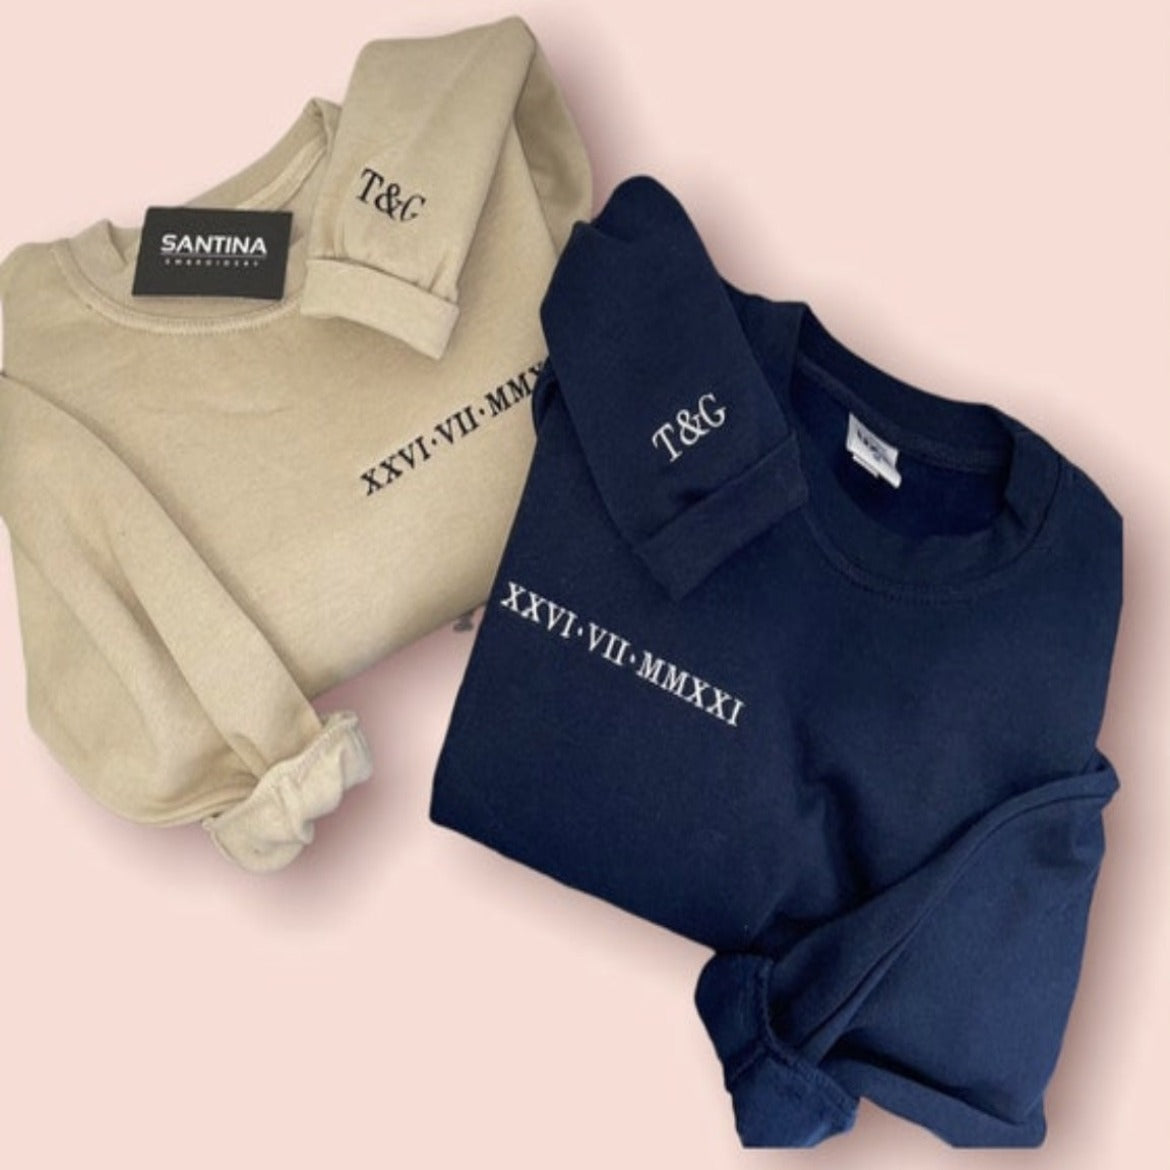 Stylish embroidered sweatshirt with Roman numerals and navy blue and beige fabric.